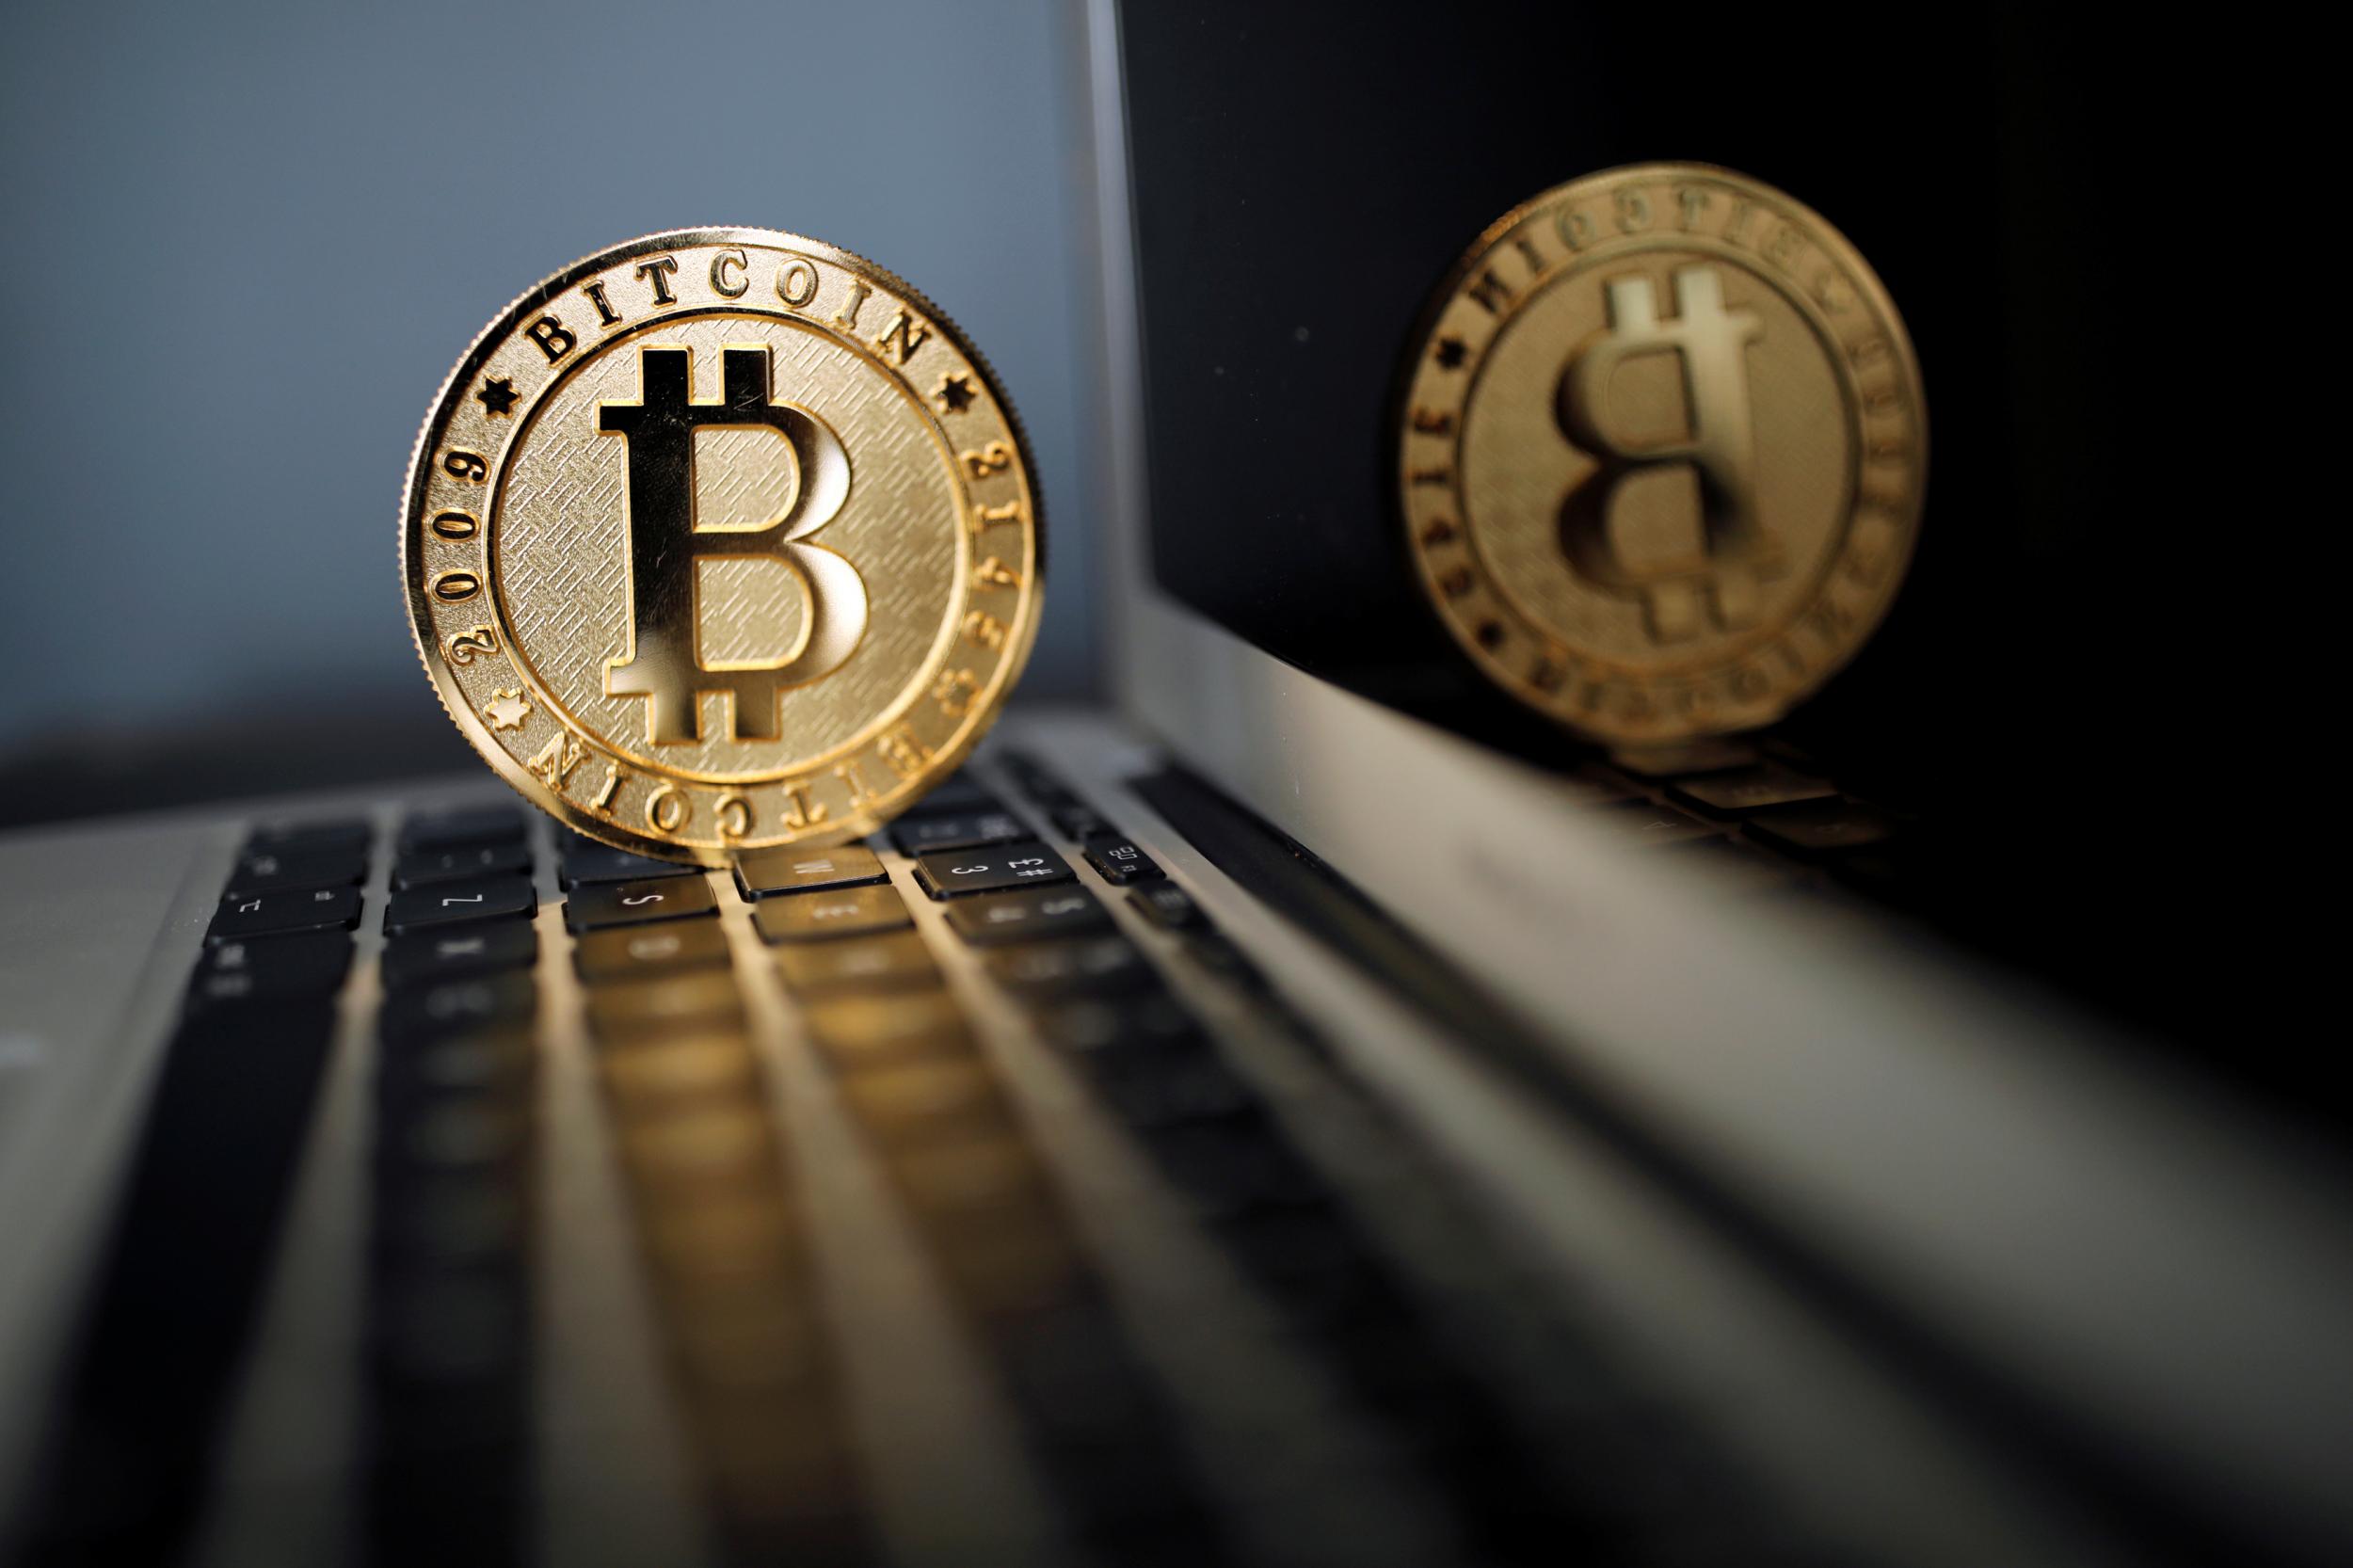 The cancellation of last week’s bitcoin upgrade has left users to choose between the two versions of the cryptocurrency